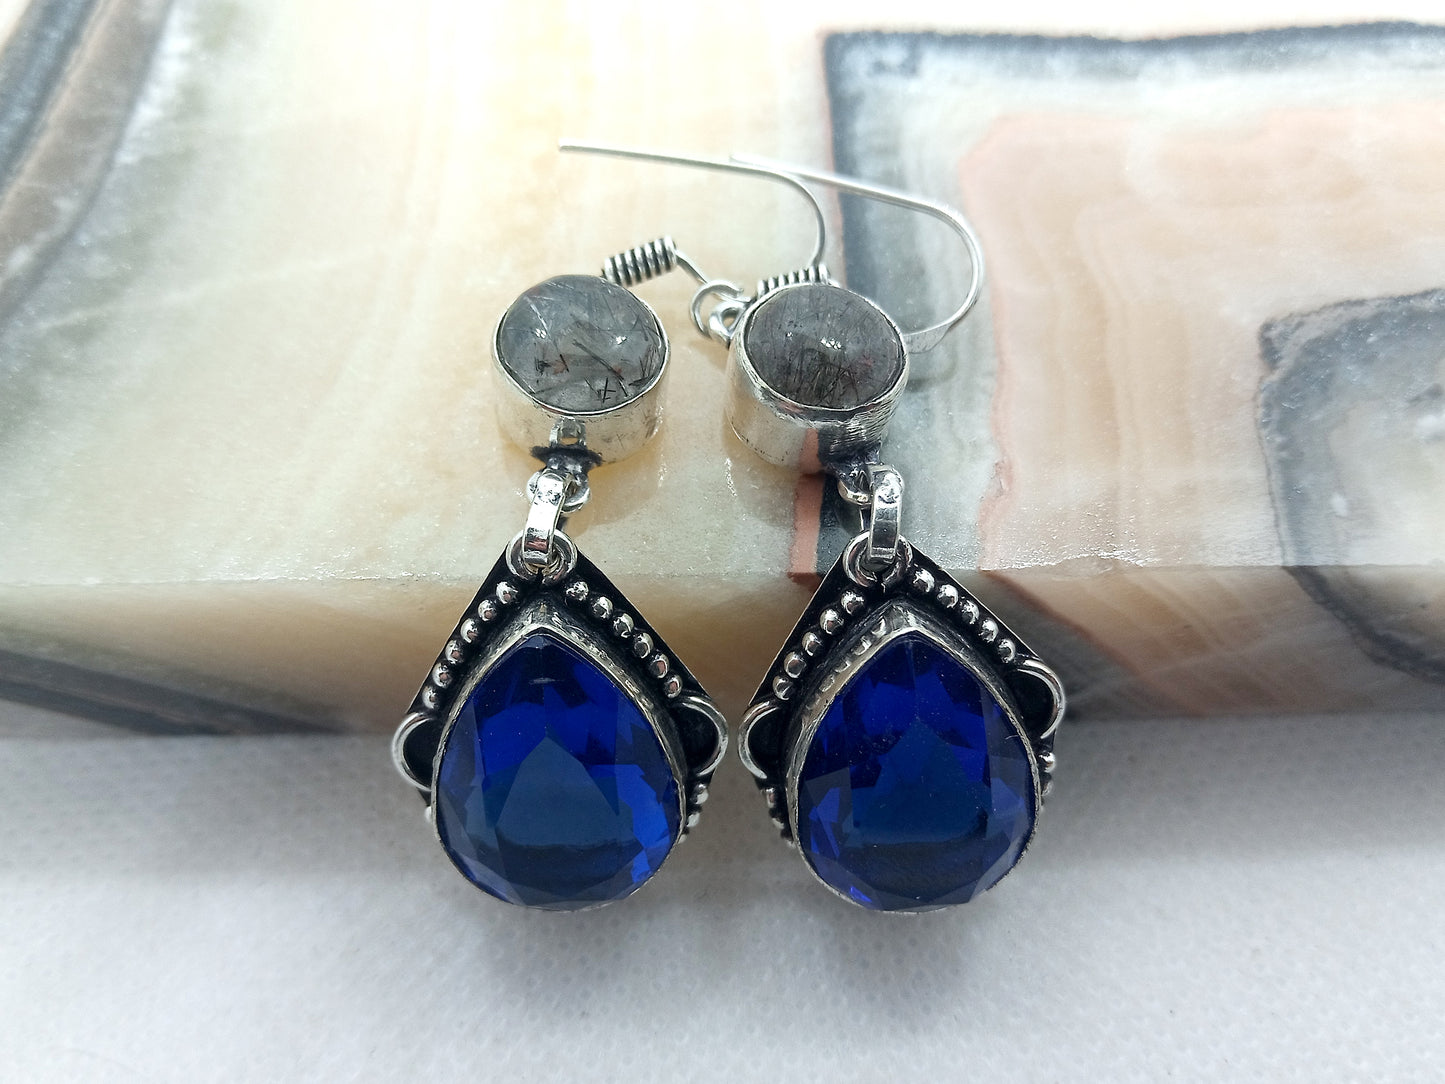 Tanzanite and tourmaline earrings in crystal